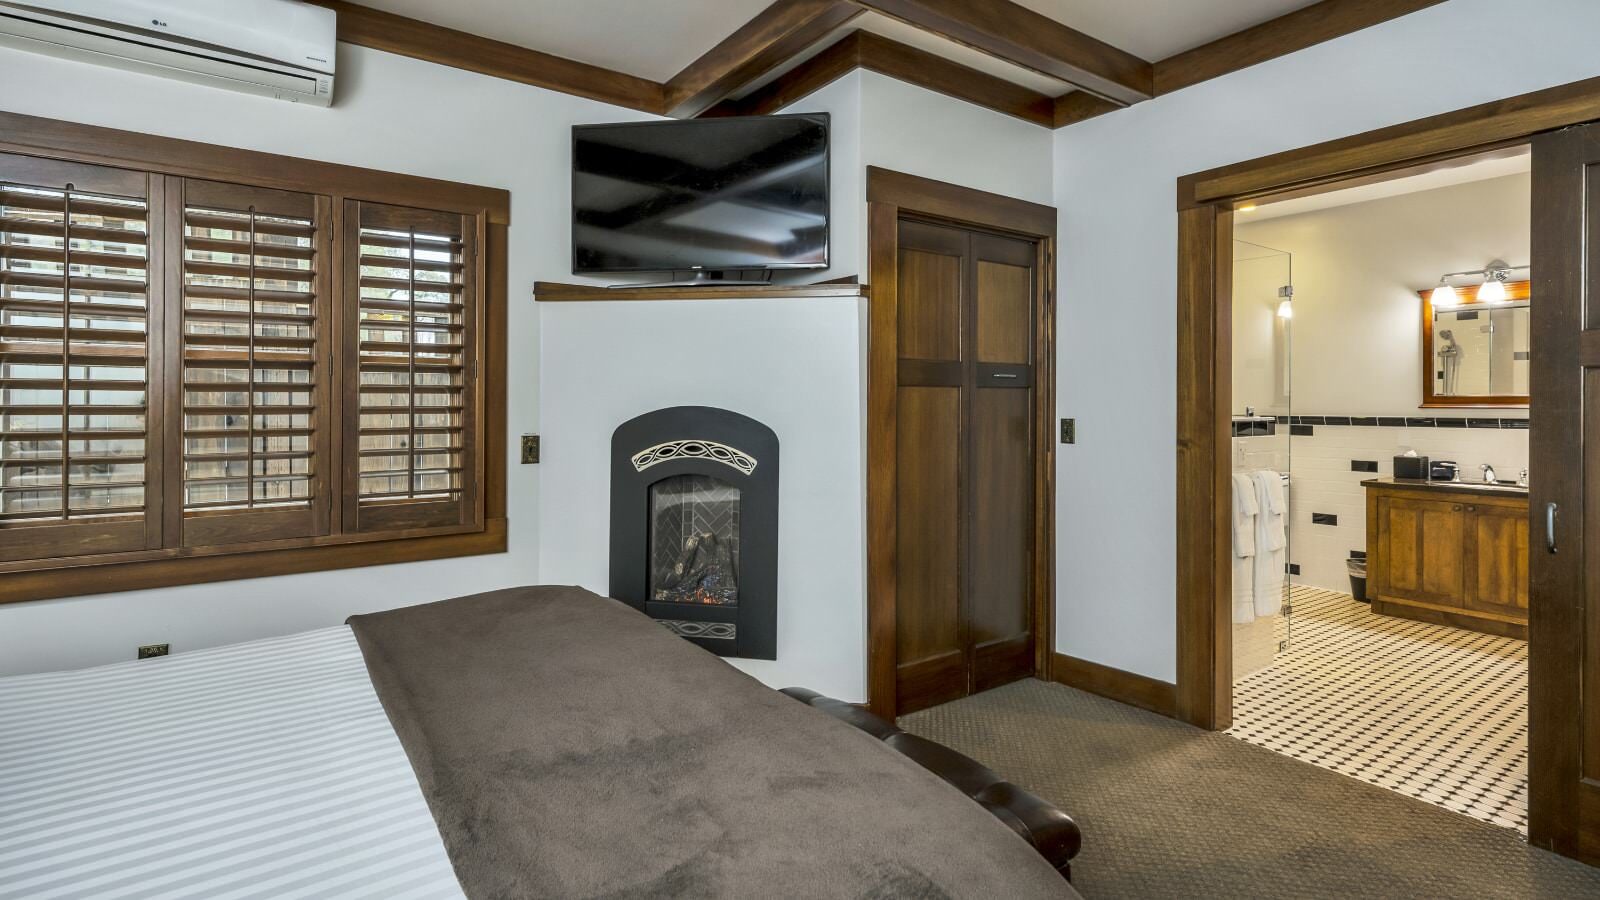 Bedroom with white walls, light colored carpeting, white bedding, leather bed bench, and electric fireplace